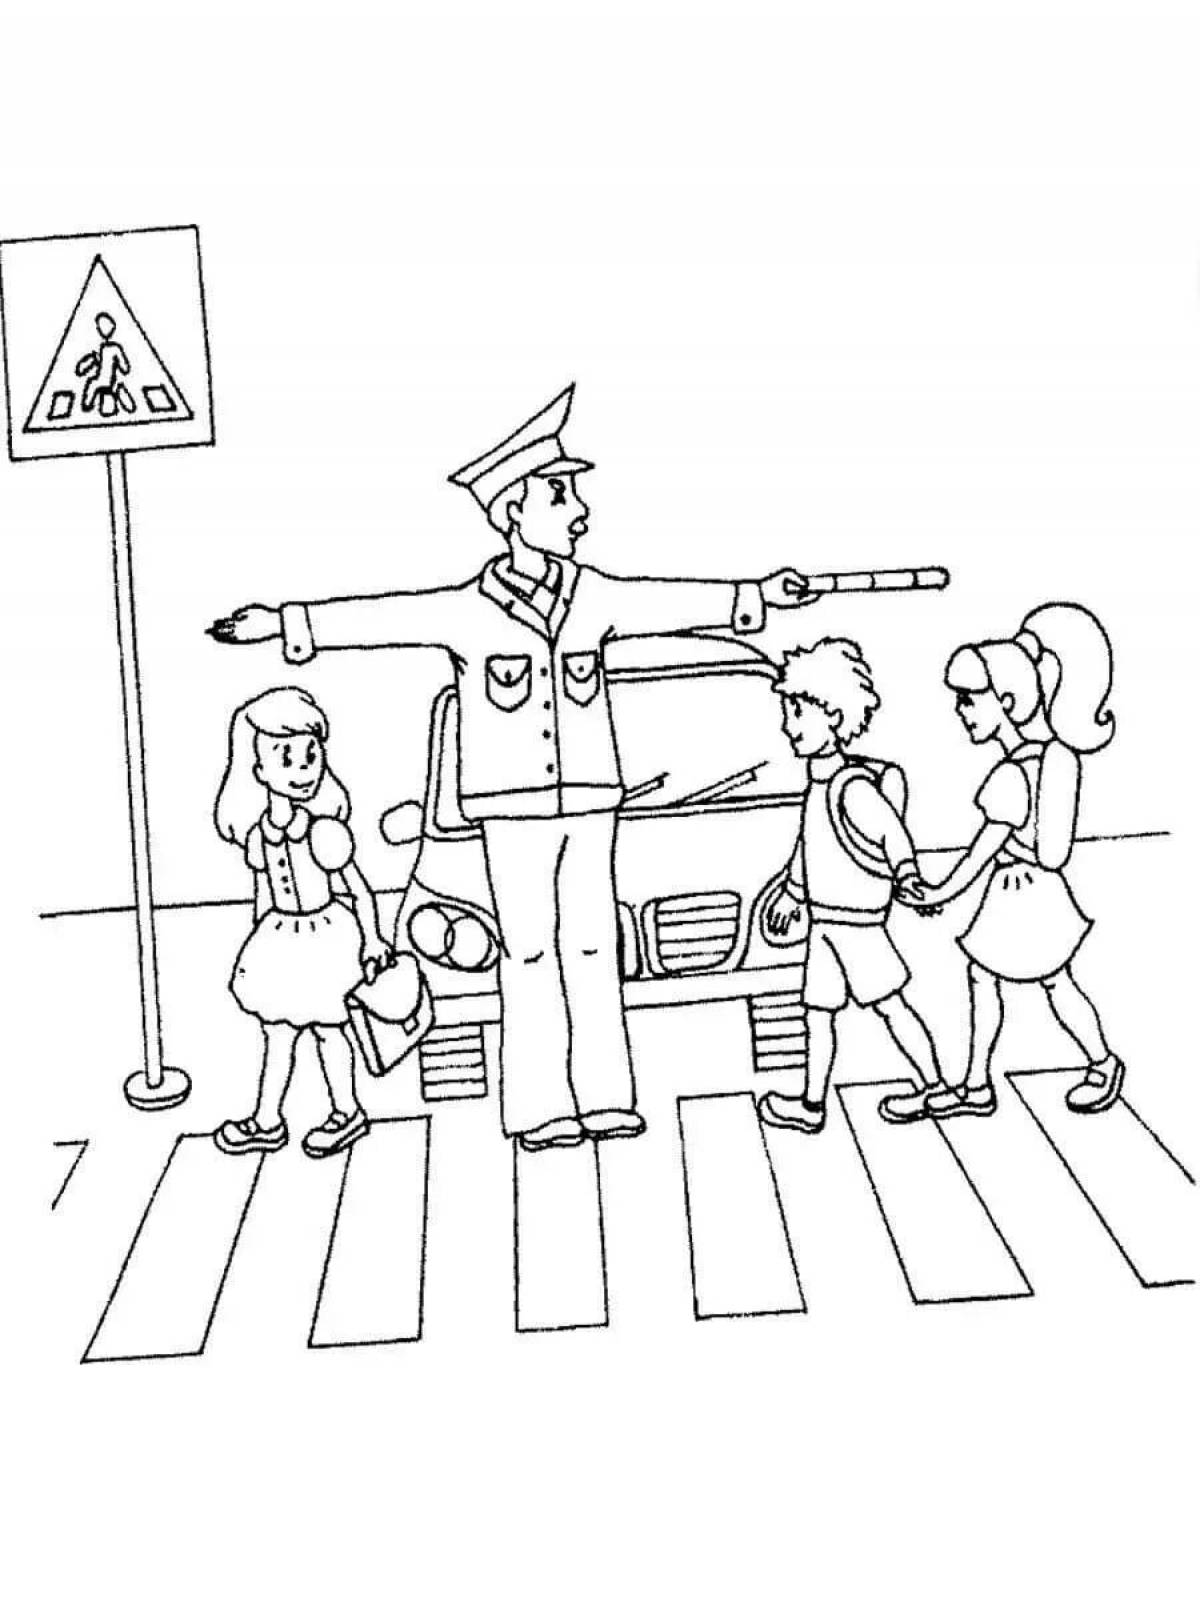 Coloring page spectacular rules of the road vsht